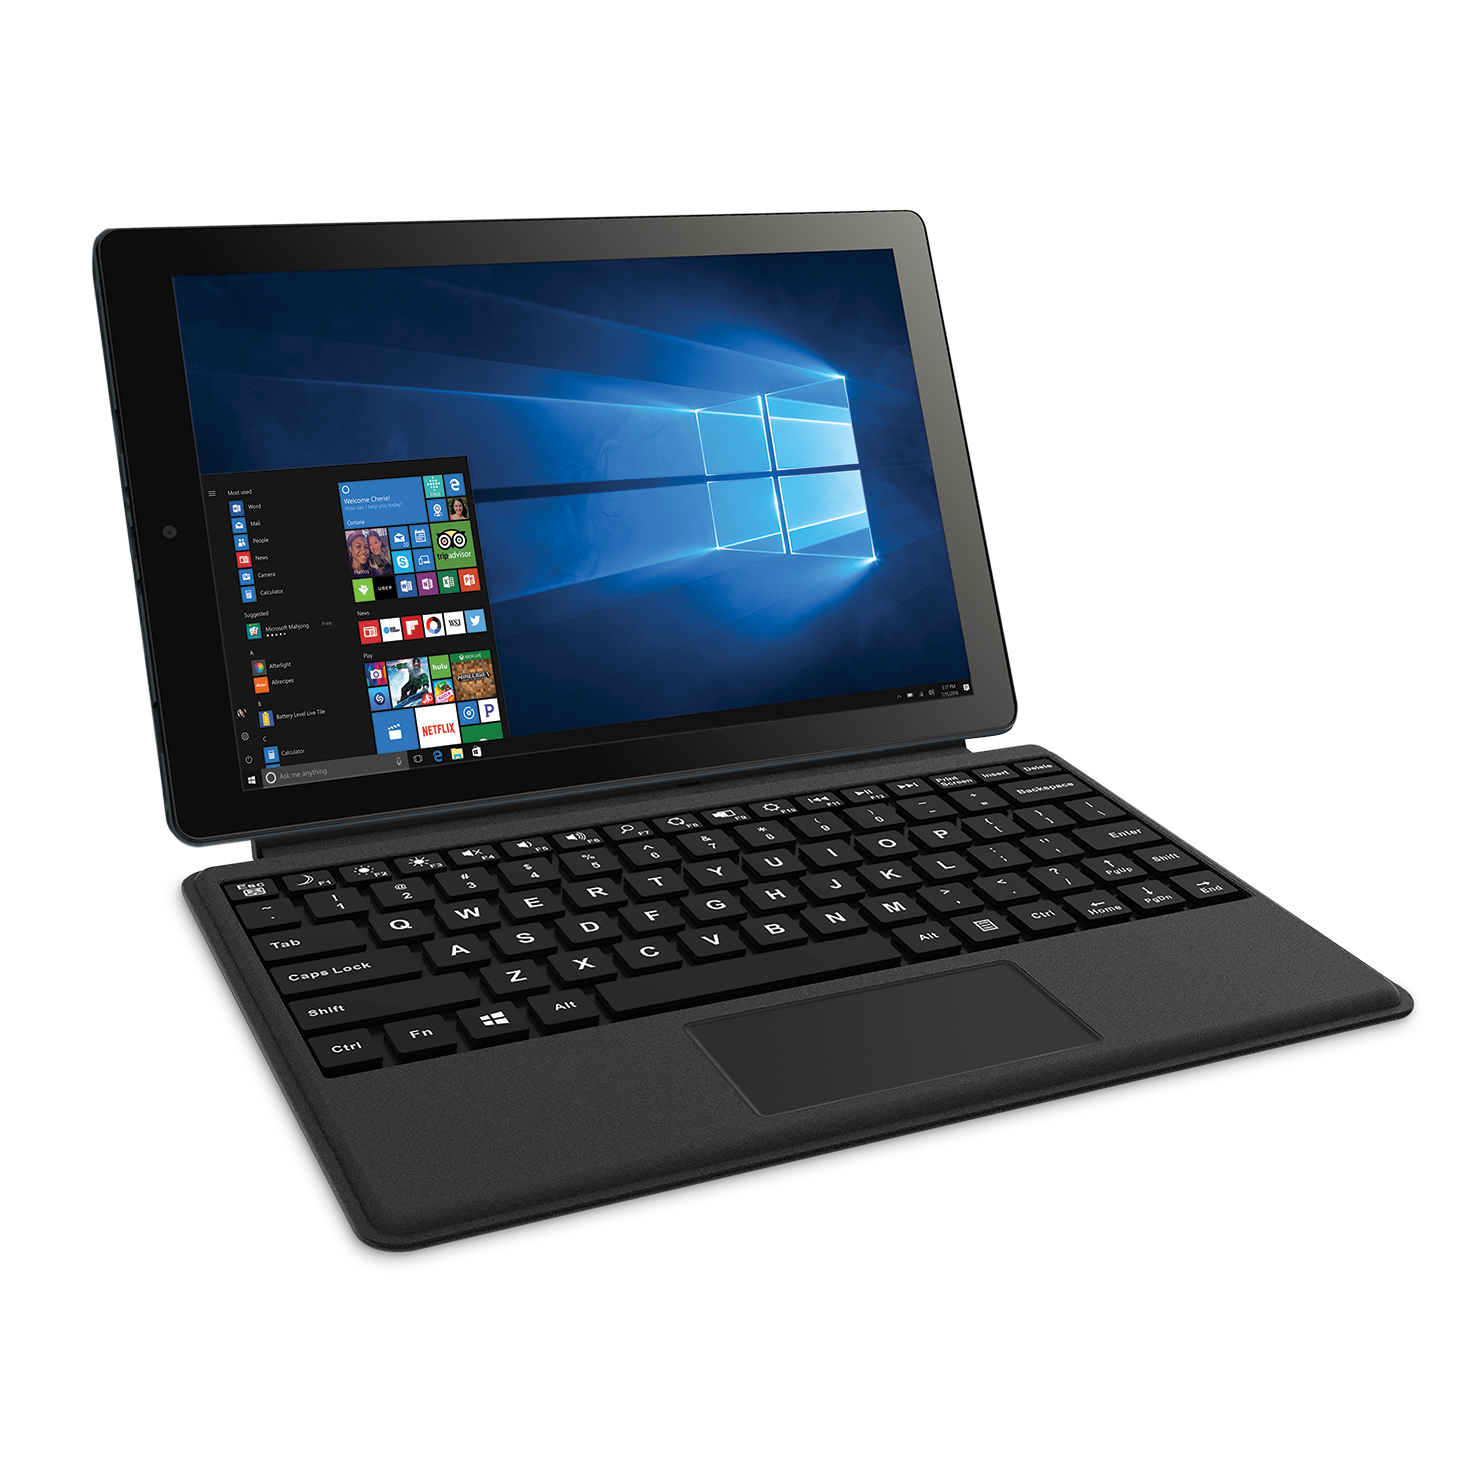 RCA Cambio 10.1" (2-in-1) Windows Tablet & Keyboard, Charcoal - image 1 of 9